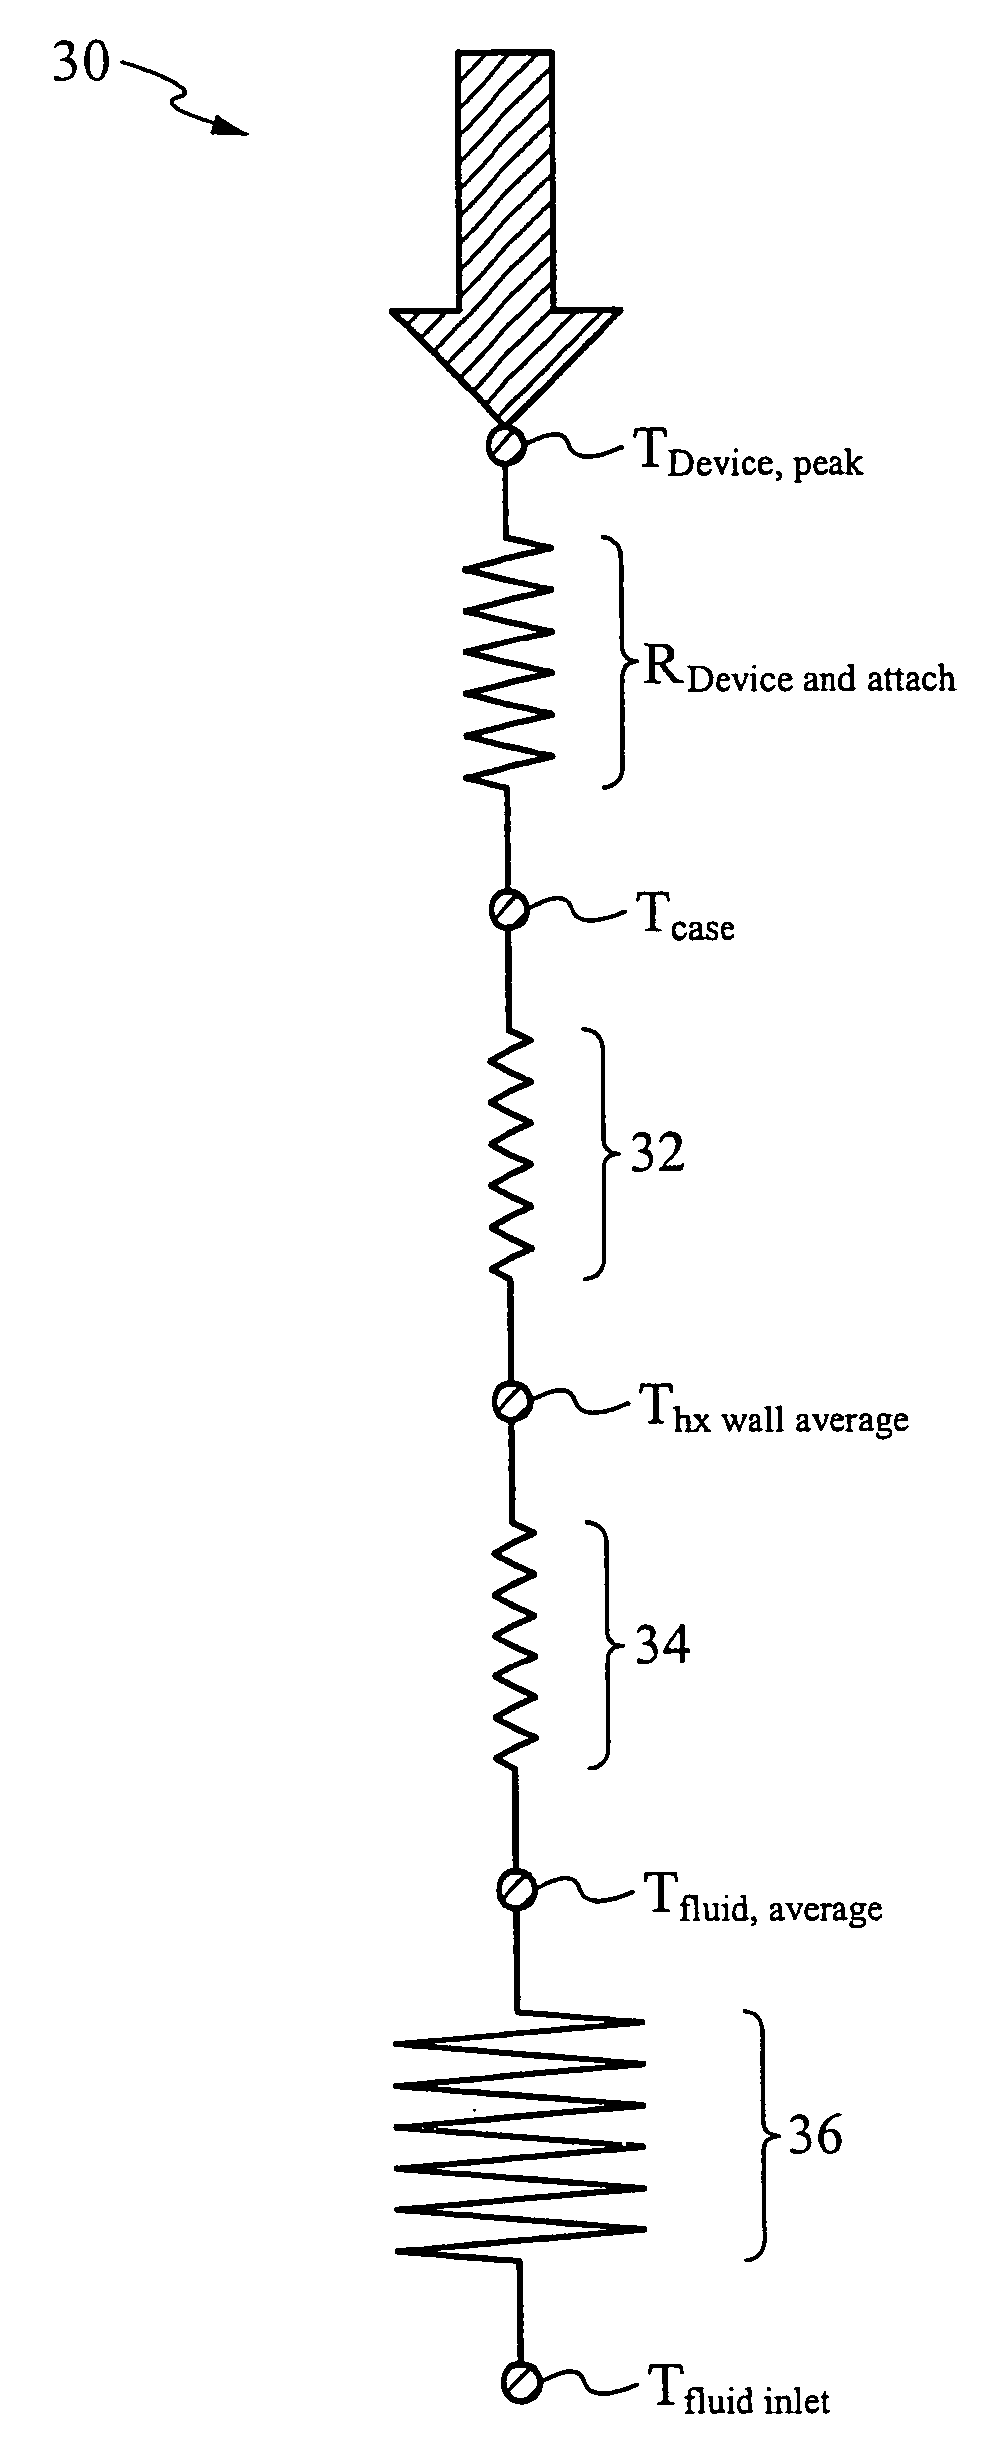 Pumped fluid cooling system and method